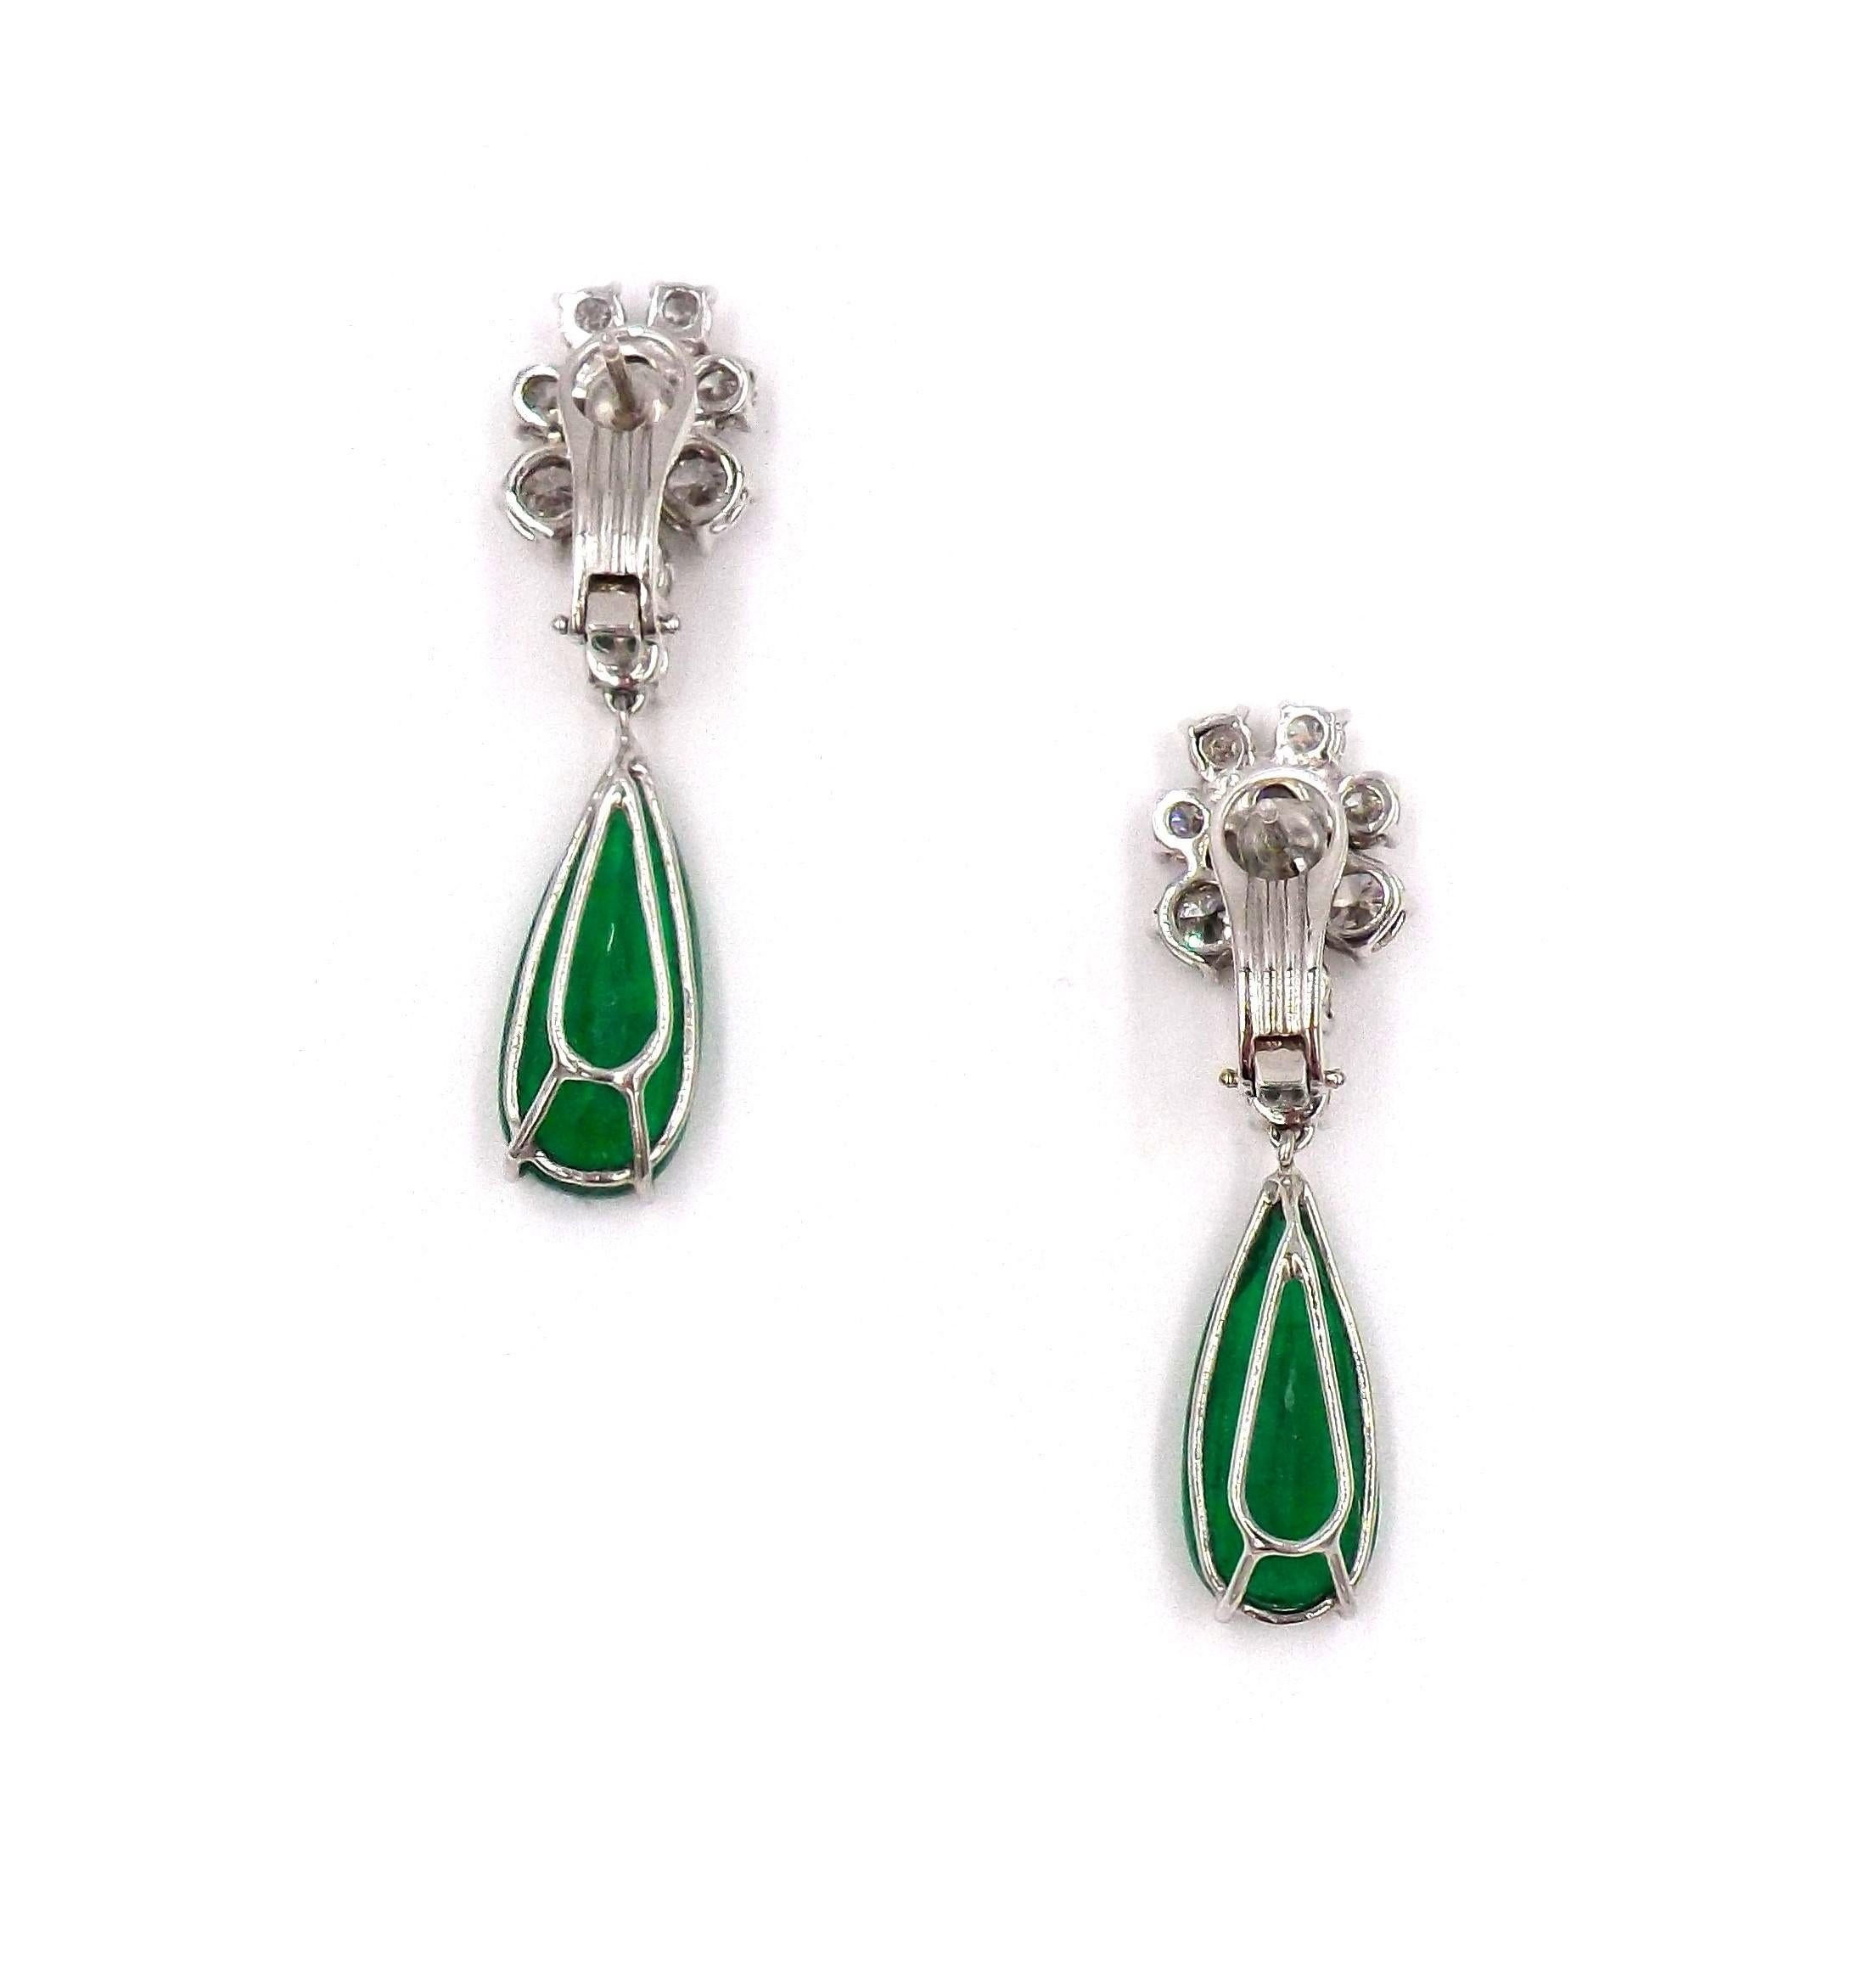 A pair of elegant earrings featuring two pear-shaped emeralds surrounded by diamonds mounted in 18K gold. Emerald weight is approx. 14.16ct. Diamond weight is approx. 4.60ct. Emeralds are accompanied by a Dunaigre certificate stating that the